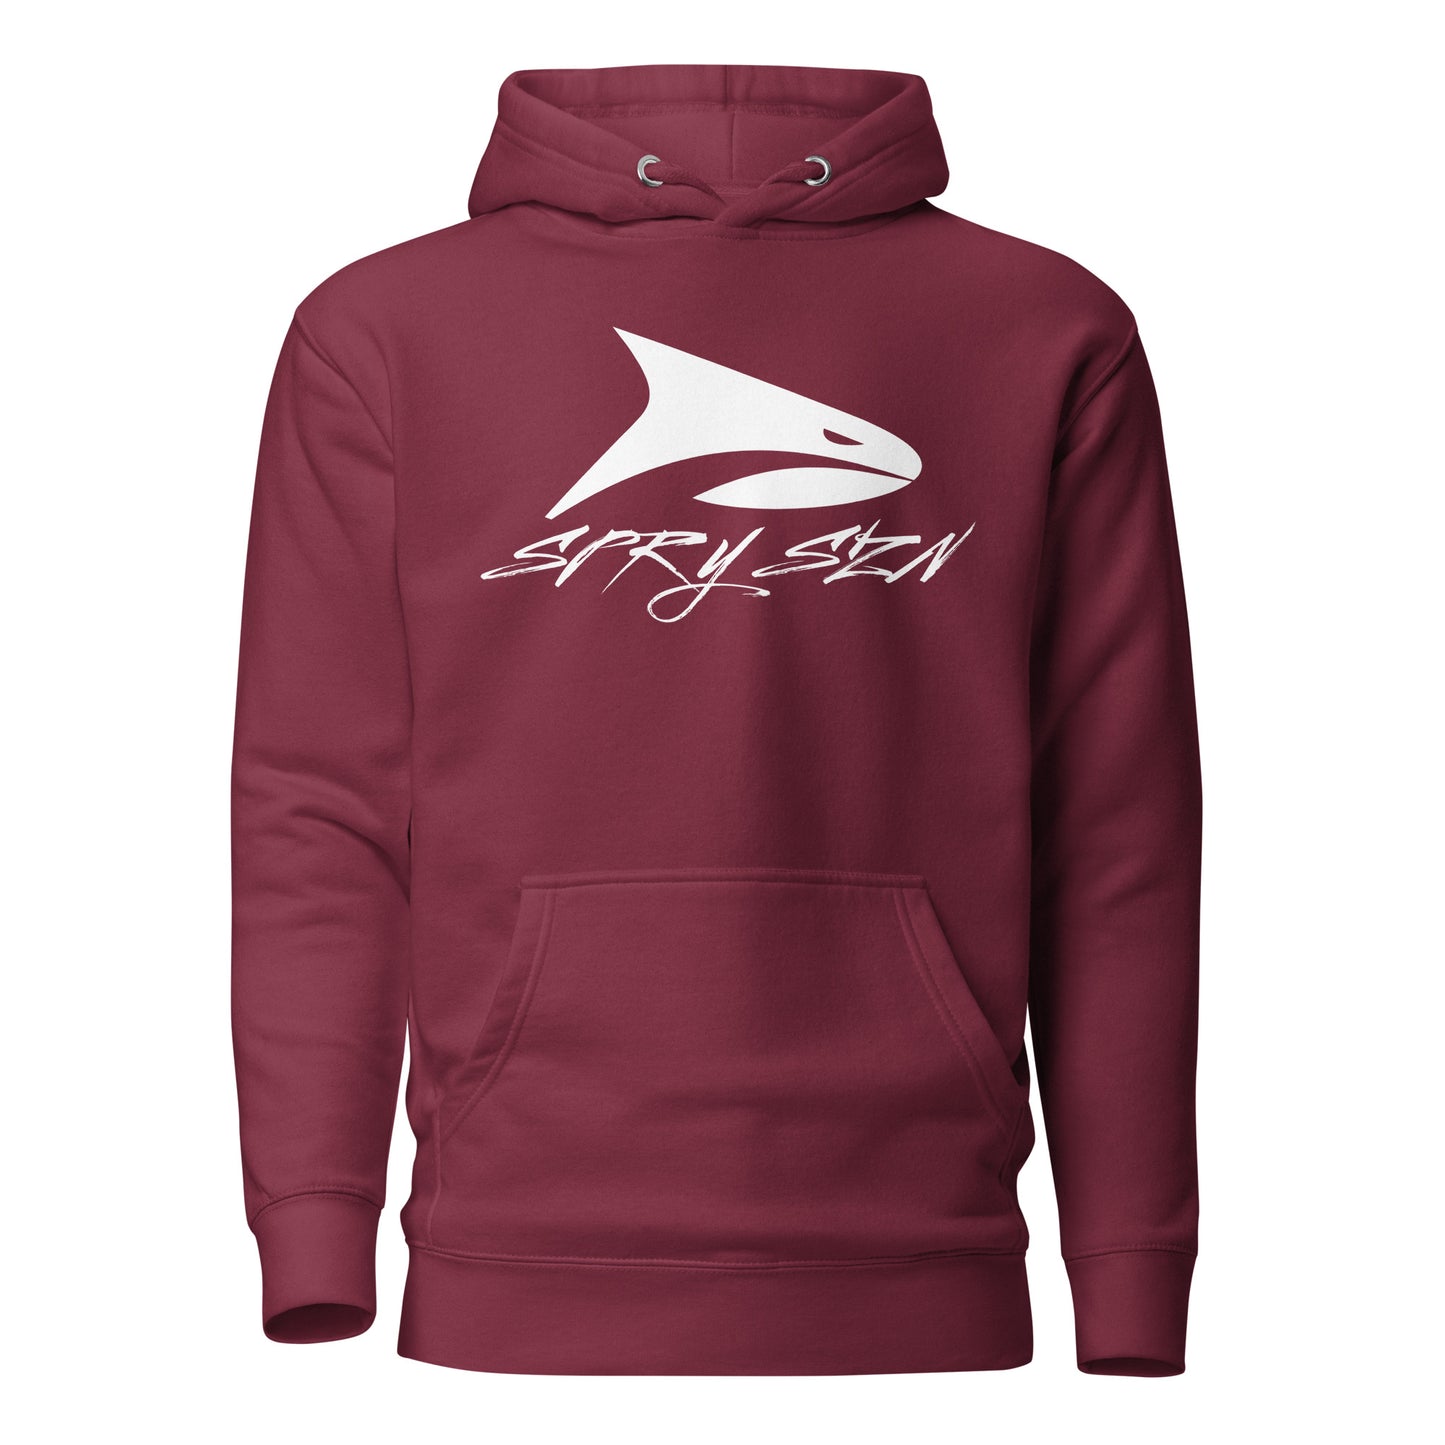 LEGACY Pullover Hoodie - White Shark